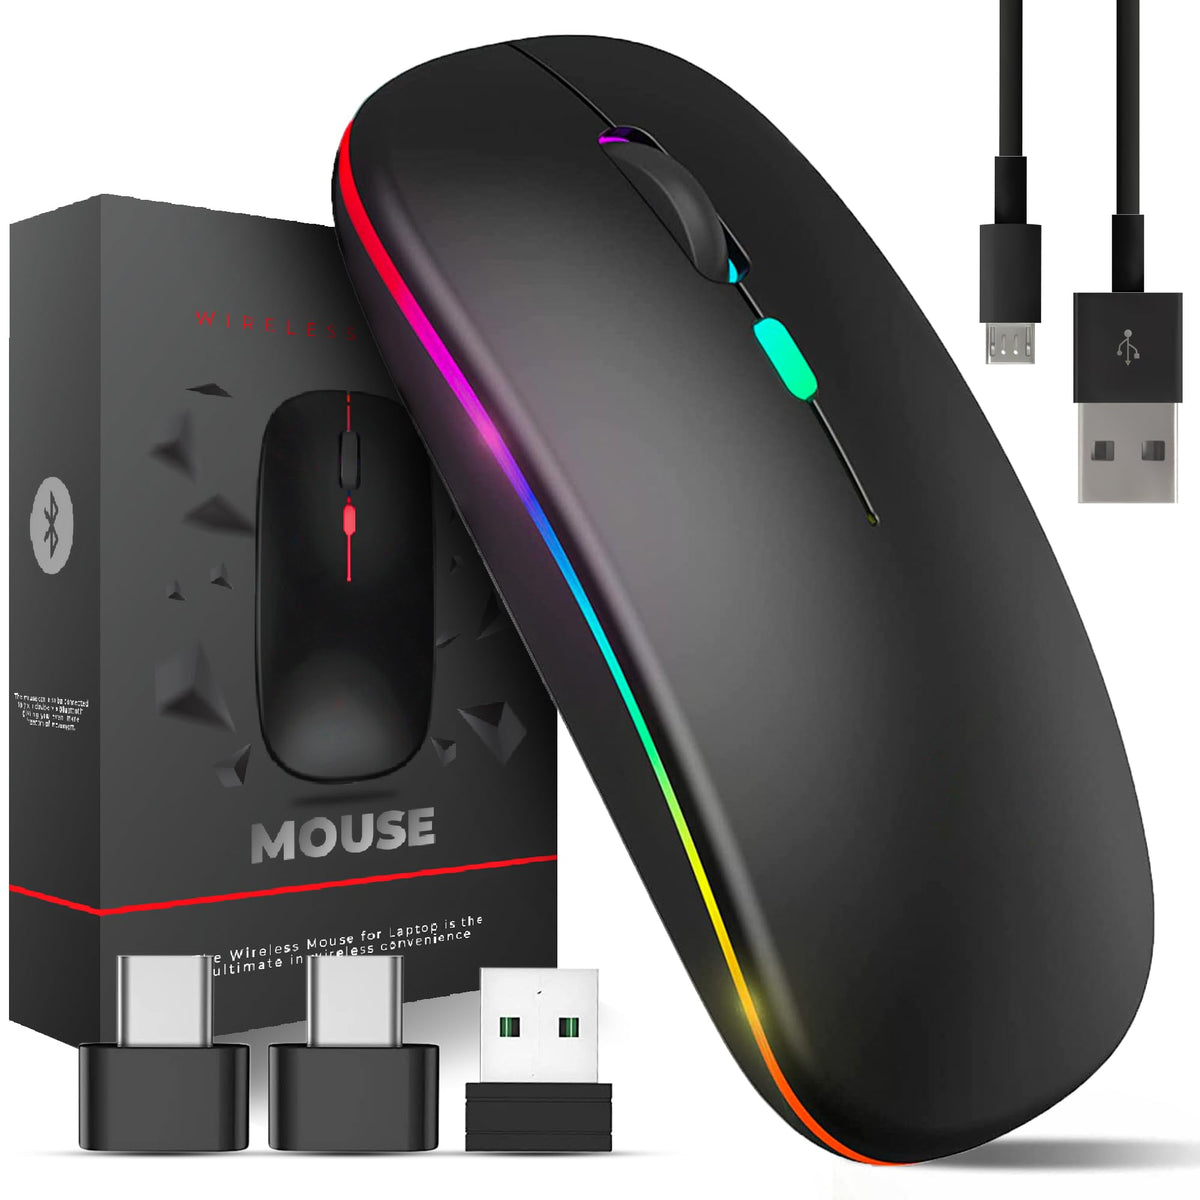 Wireless Mouse for Laptop With 2 USB A to USB C Adapter, 2.4GHZ Bluetooth Mouse Rechargeable, Laptop Mouse Computer Accessories, USB Mouse 3 Buttons-Laptop Mouse Wireless PC Mouse 800 to 2400 Dpi